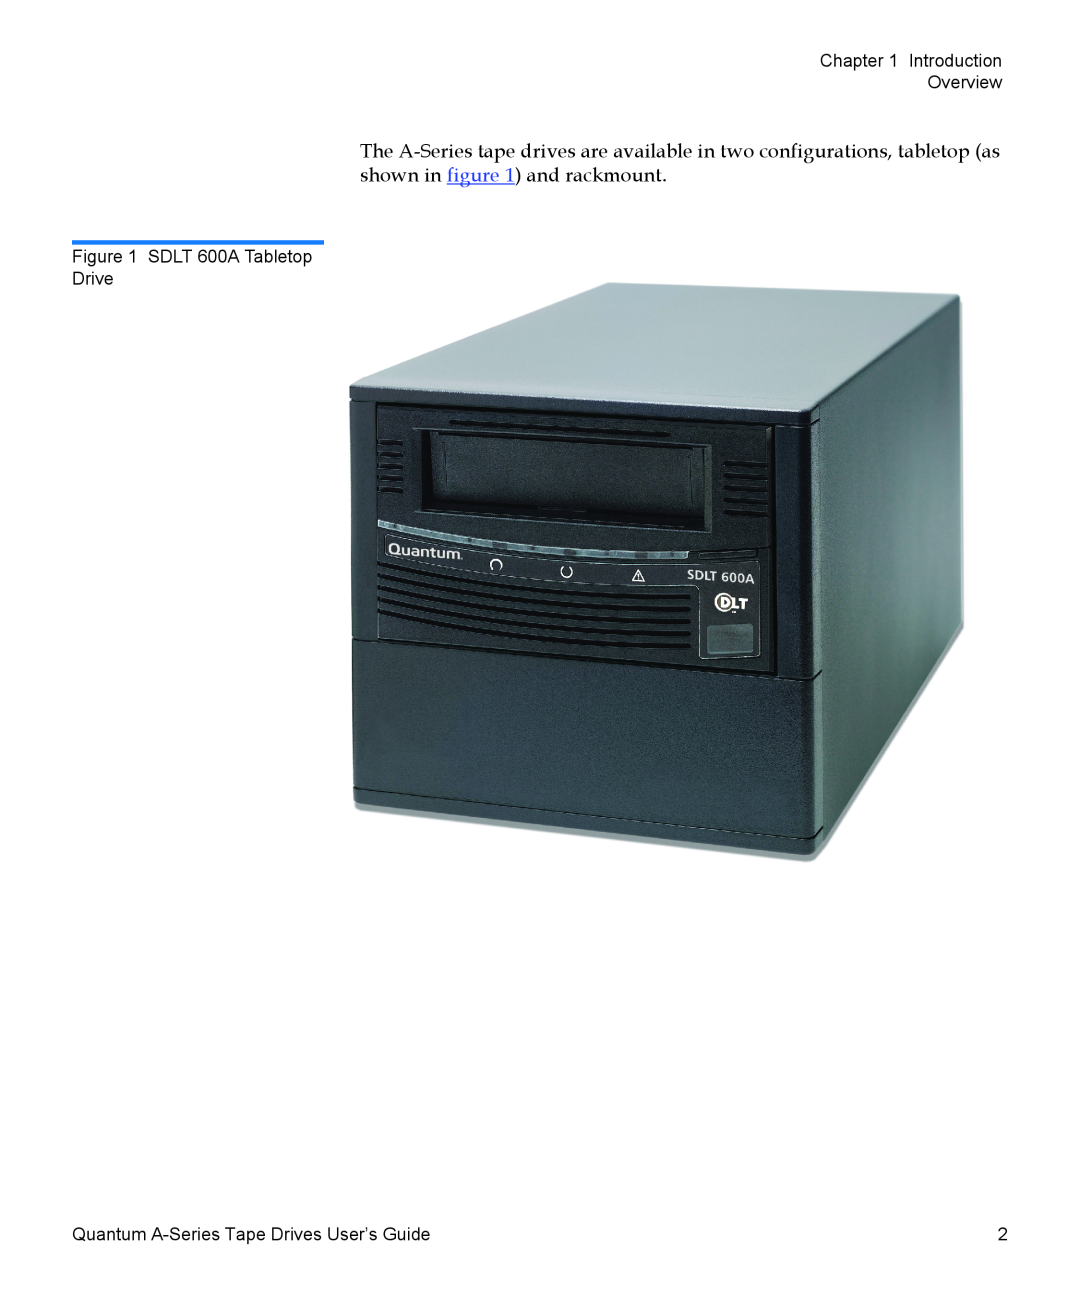 Quantum manual Introduction Overview, SDLT 600A Tabletop Drive, Quantum A-Series Tape Drives User’s Guide 